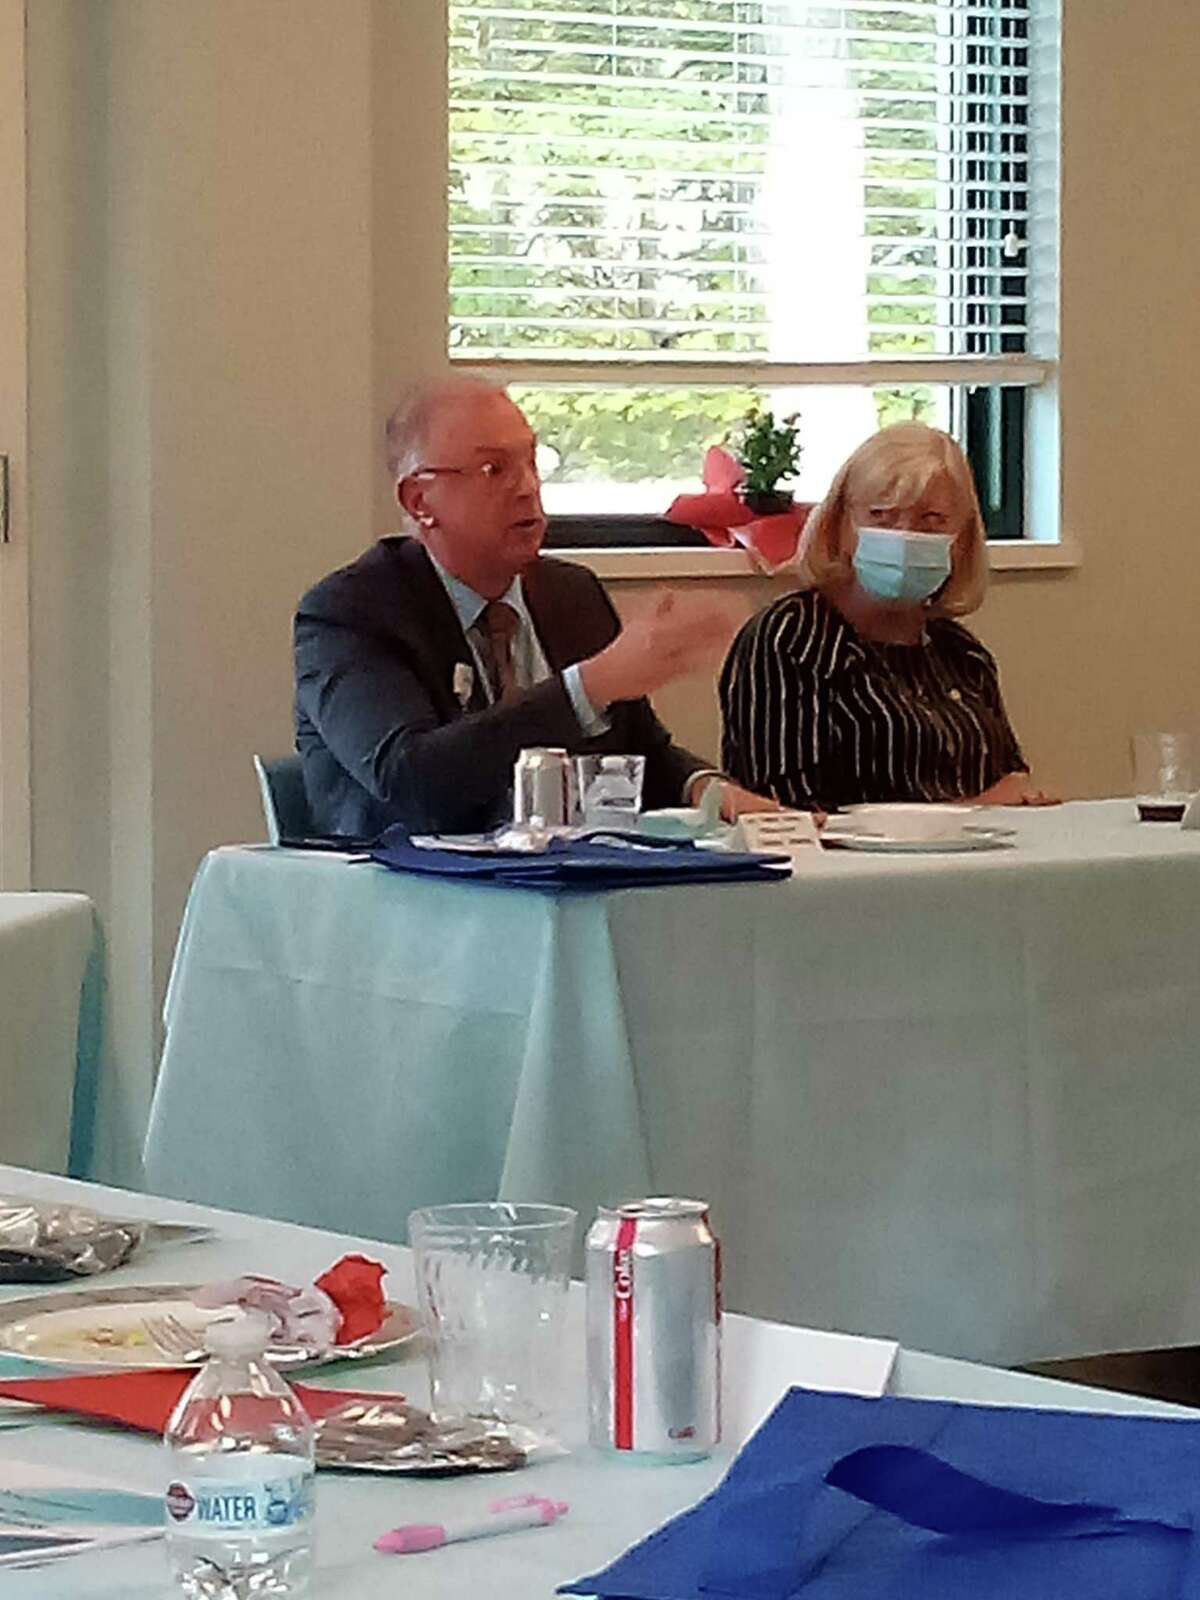 Community Health & Wellness Center of Greater Torrington's CEO, Joanne Borduas, held a round table discussion Friday on the challenges of providing health care and mental health services to rural communities. Sharon Hospital president Mark Hirko speaks during the discussion. He is seated with